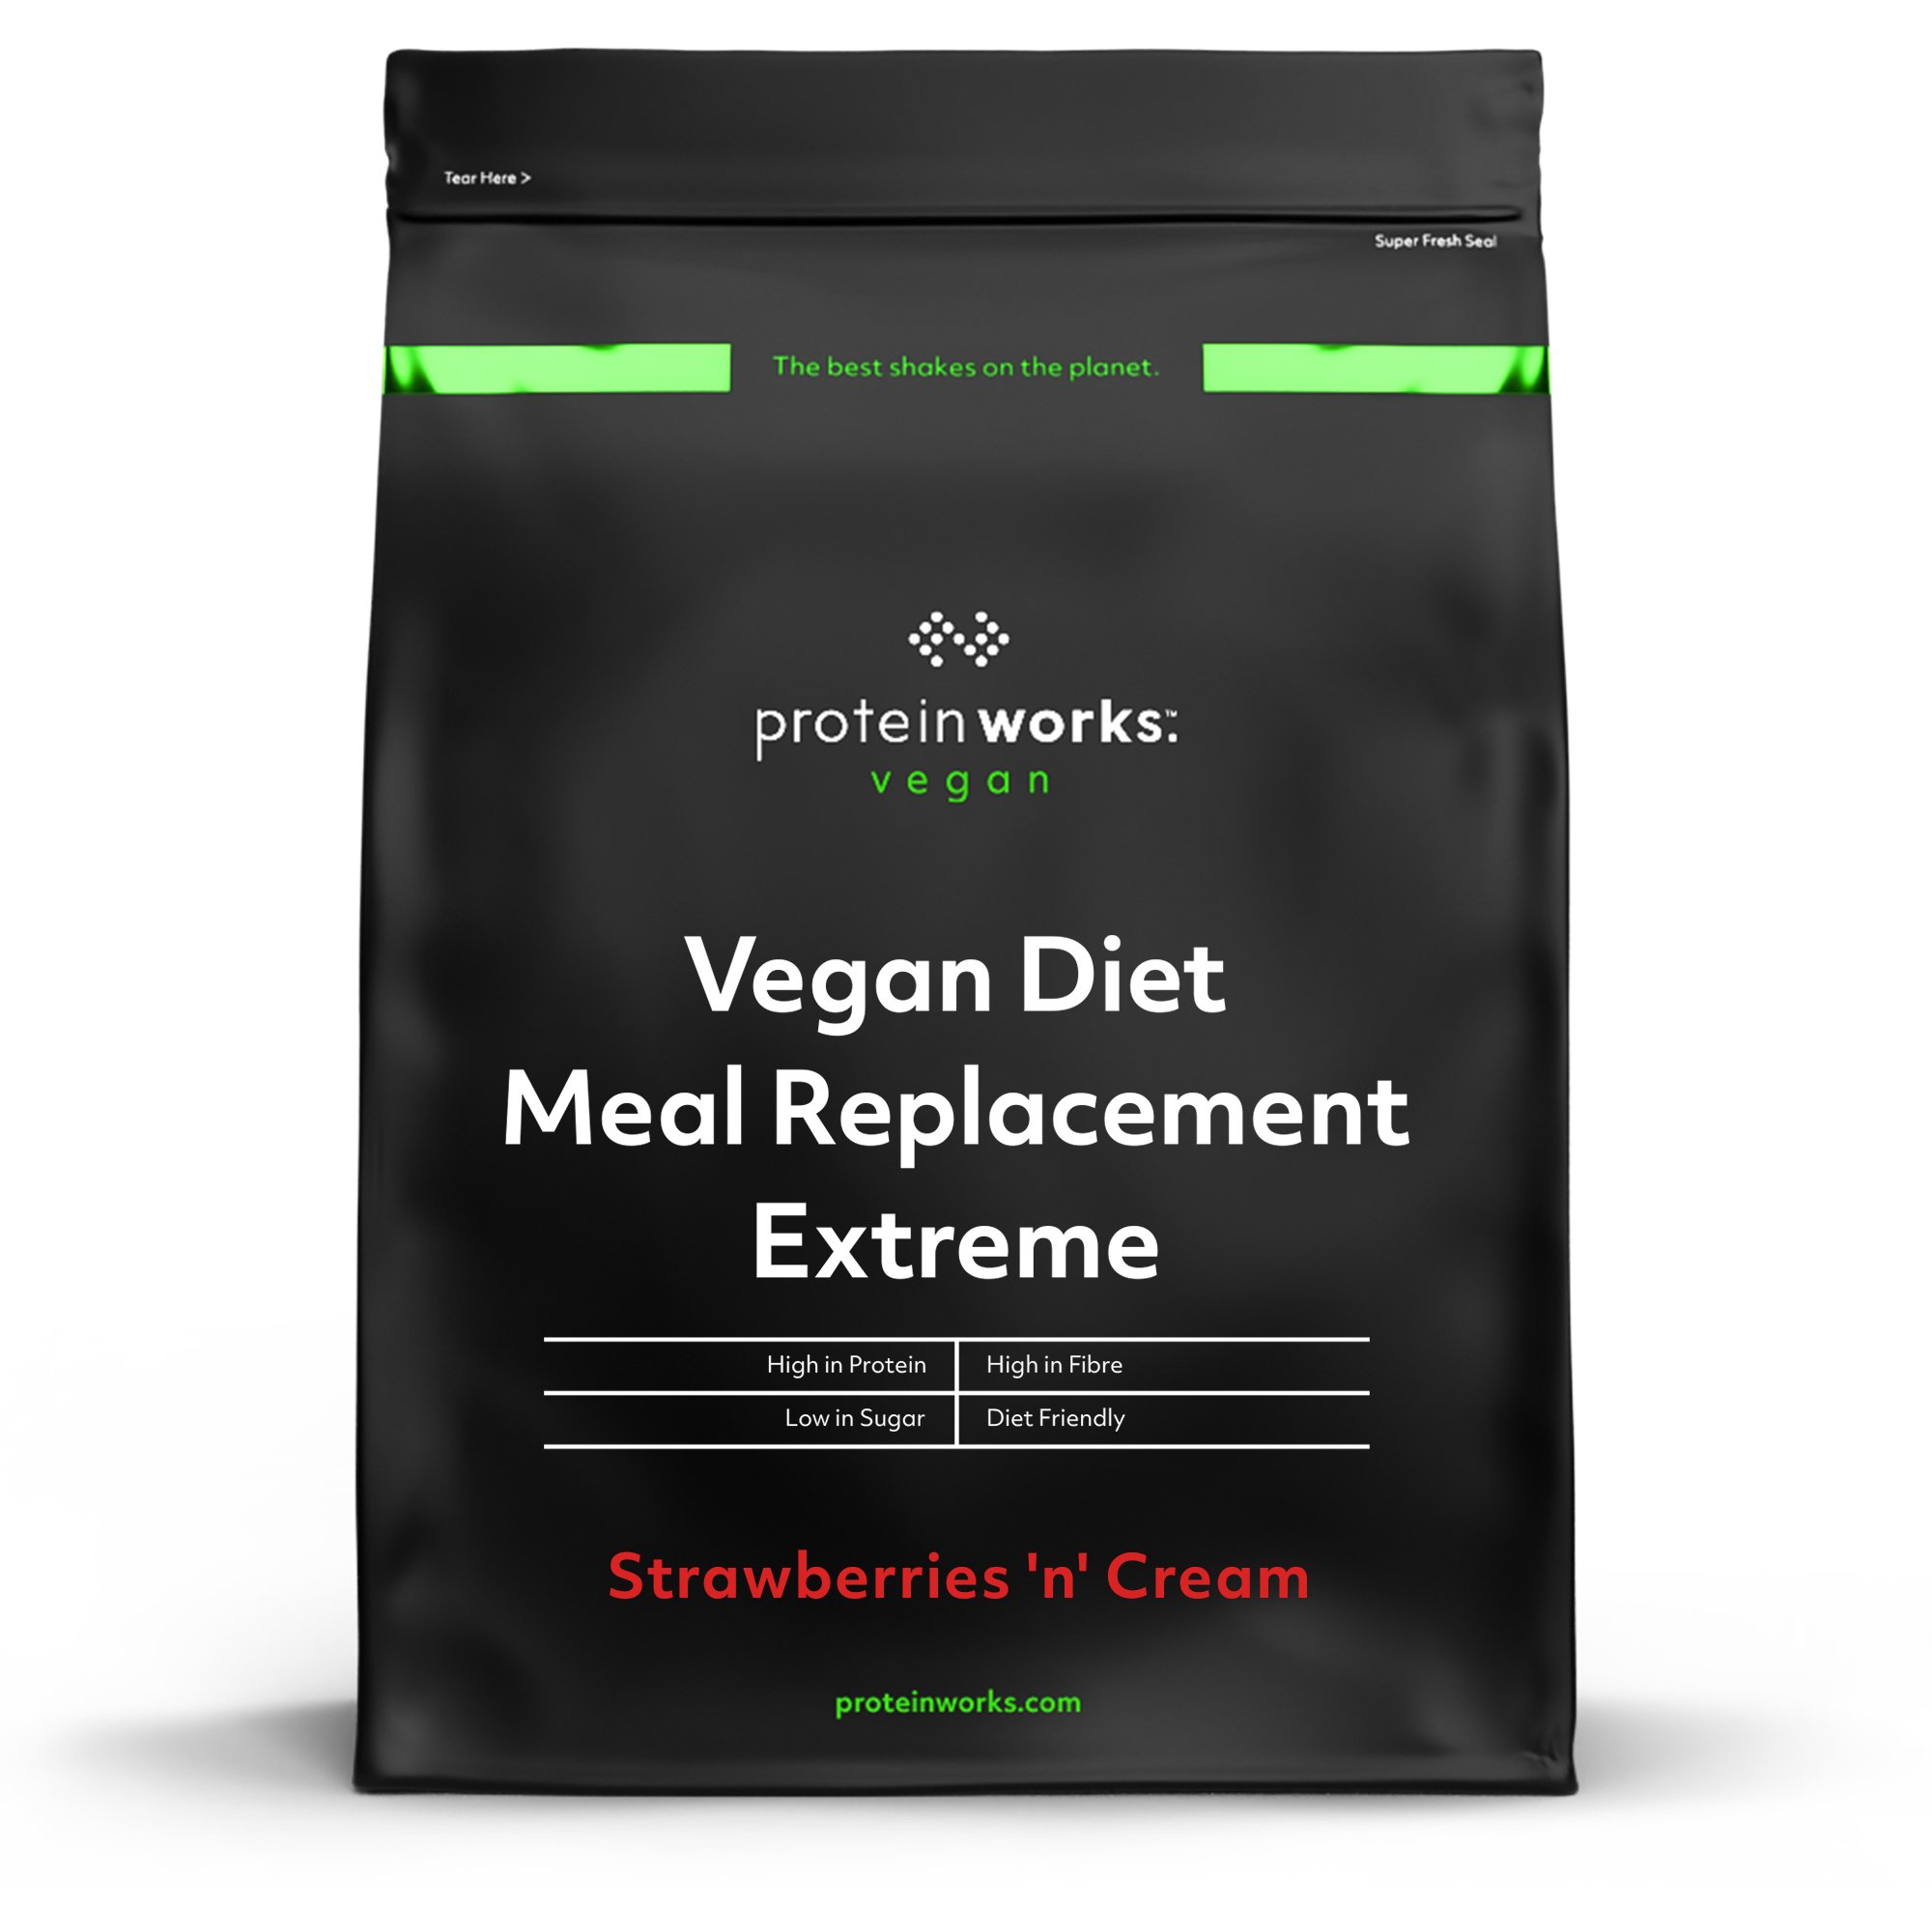 Vegan Diet Meal Replacement Extreme